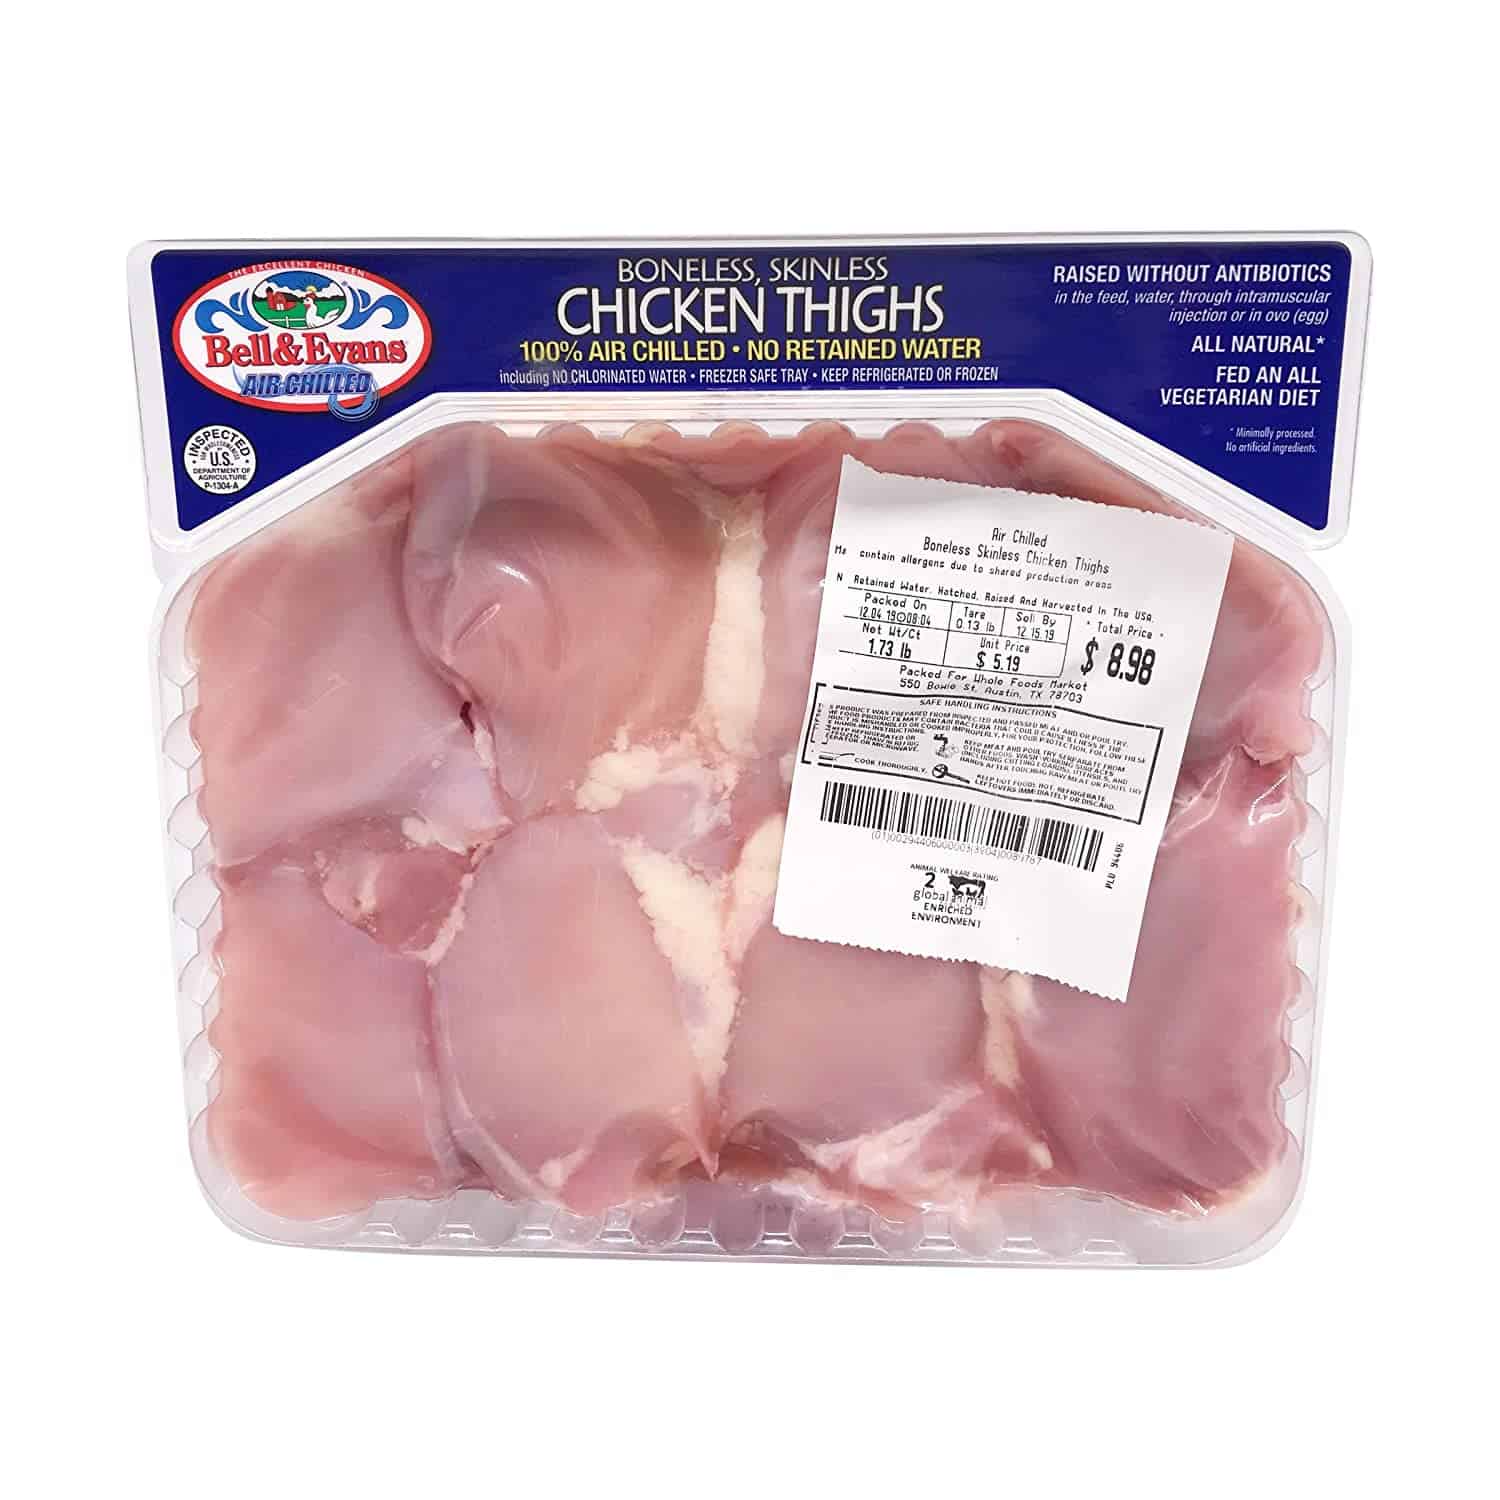 Oasis Fresh Bell and Evans Chicken Thigh Boneless Skinless Pack